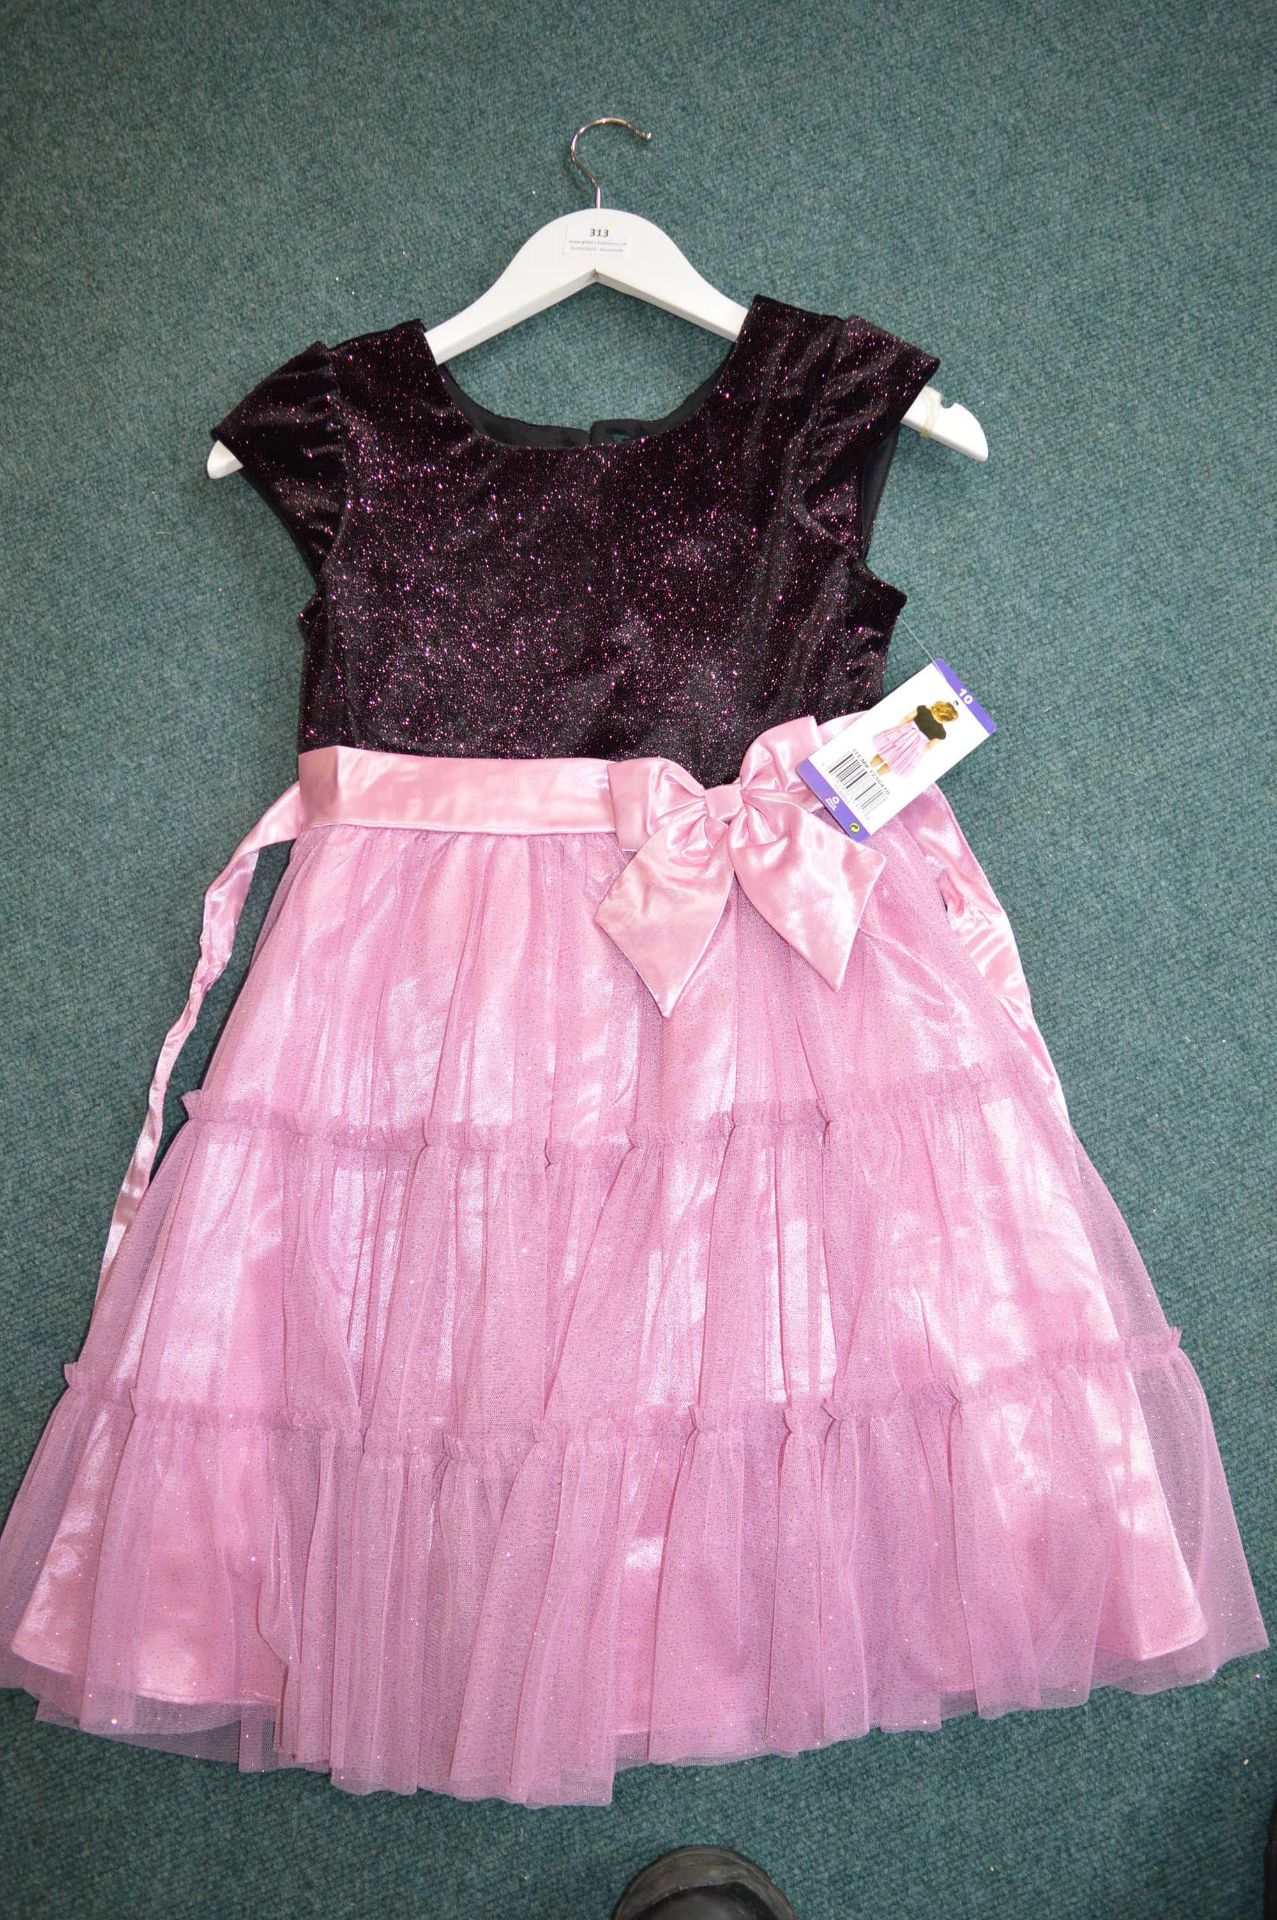 Joana Michelle Girl's Party Dress Size: 10 years